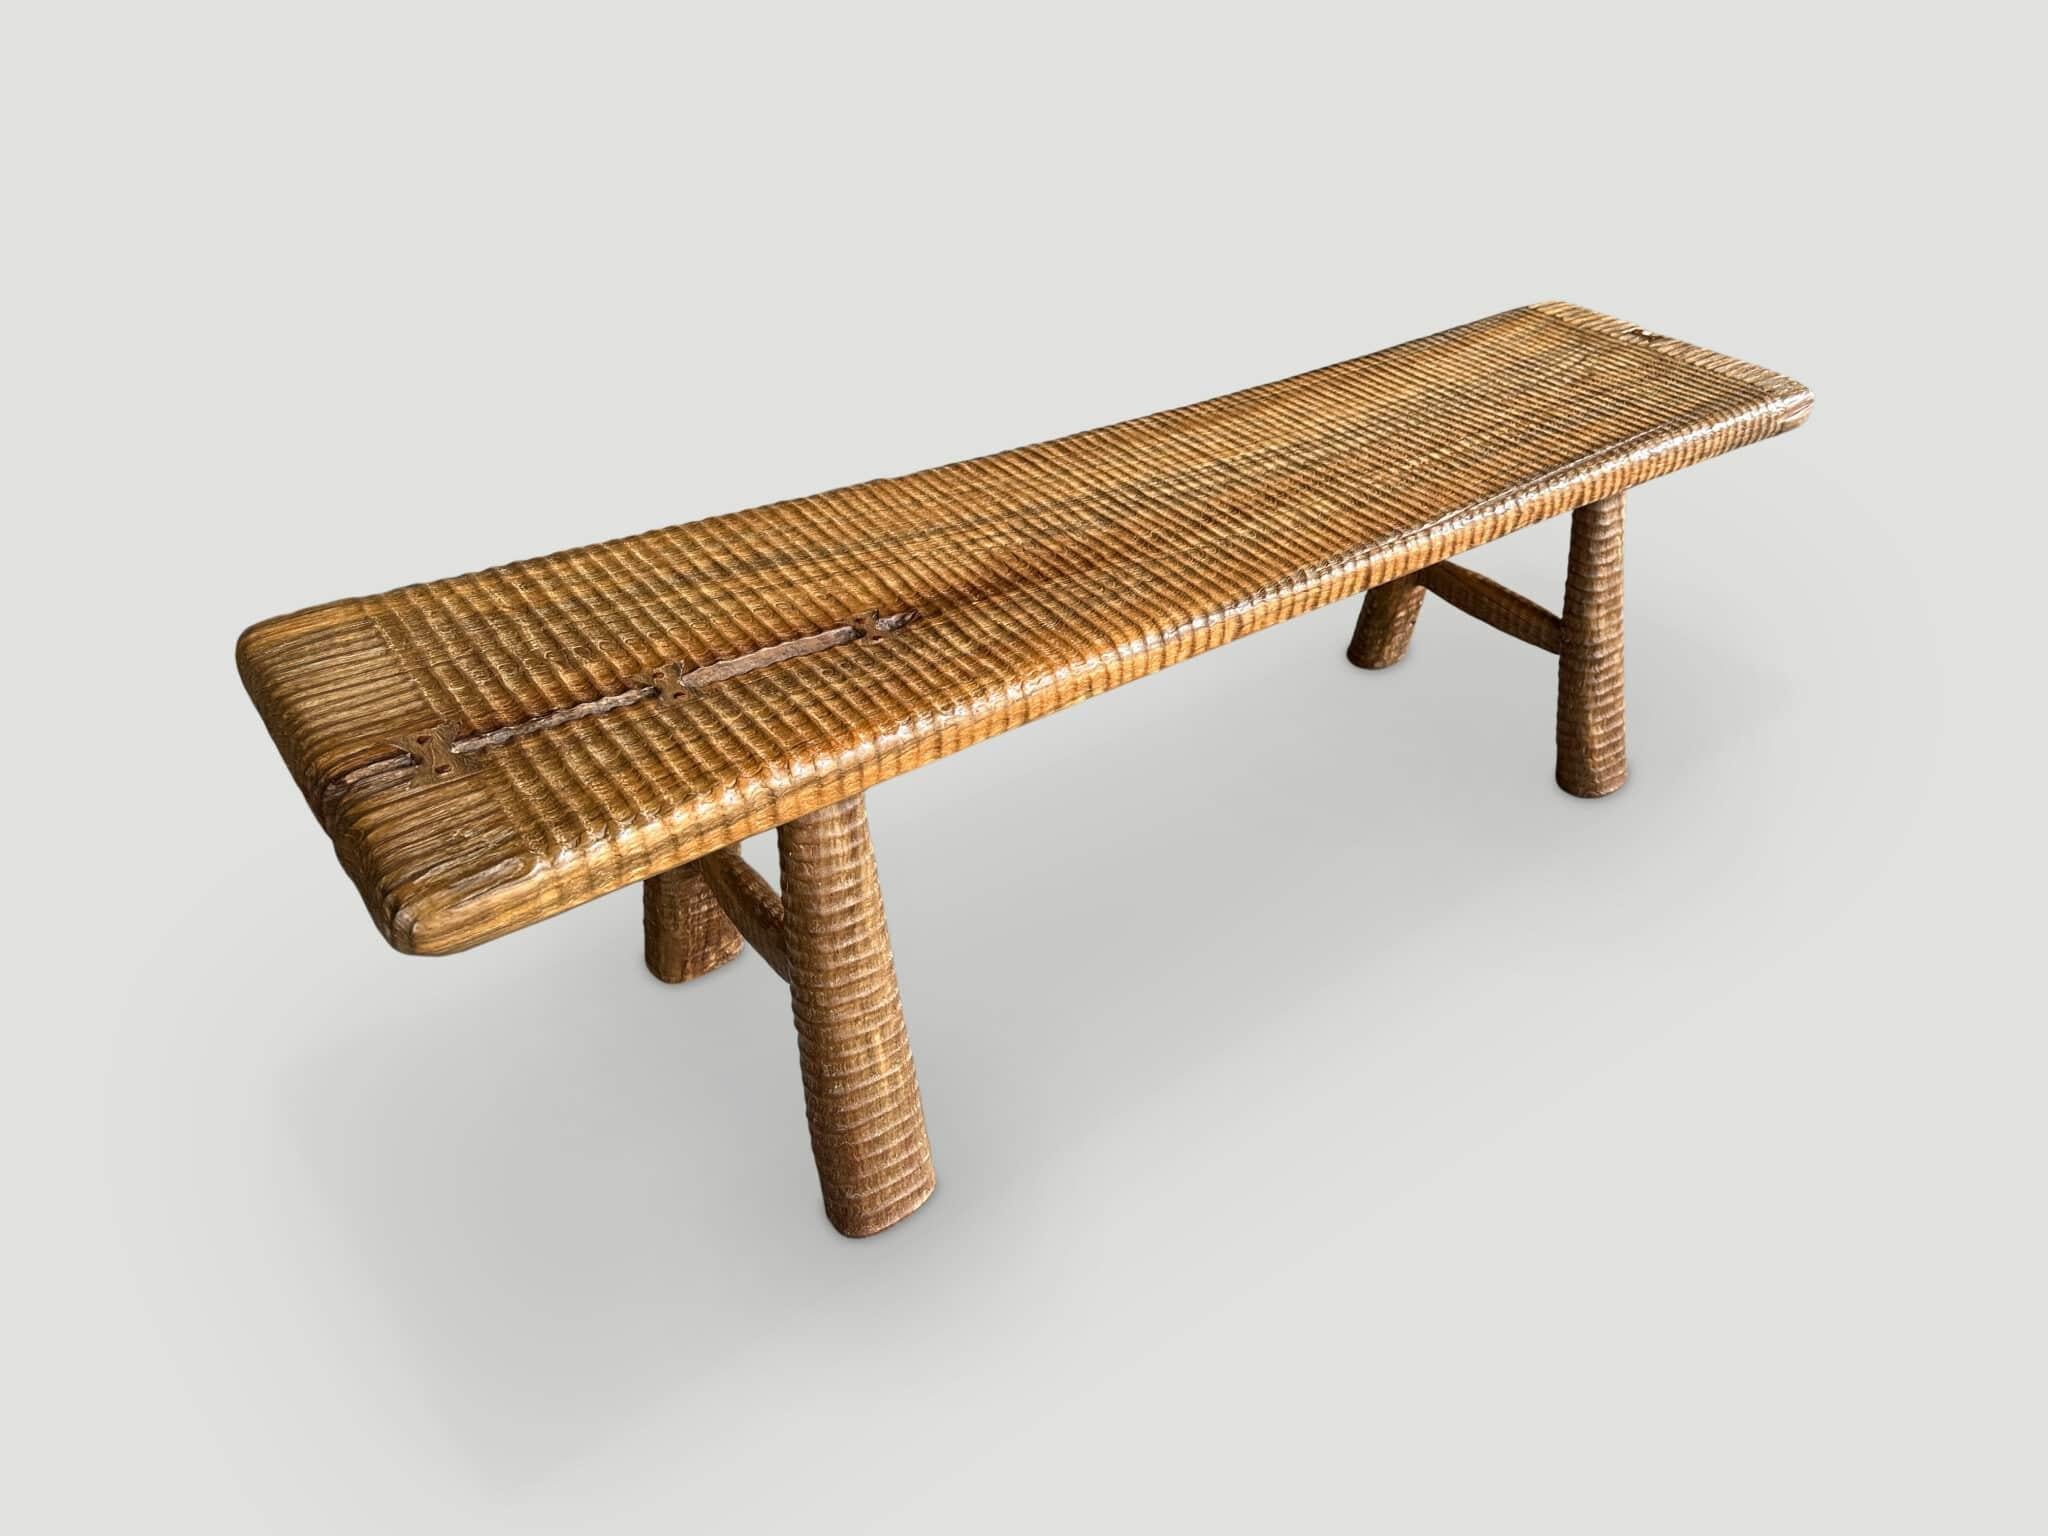 Andrianna Shamaris Impressive Hand Carved Natural Teak Wood Bench In Excellent Condition For Sale In New York, NY